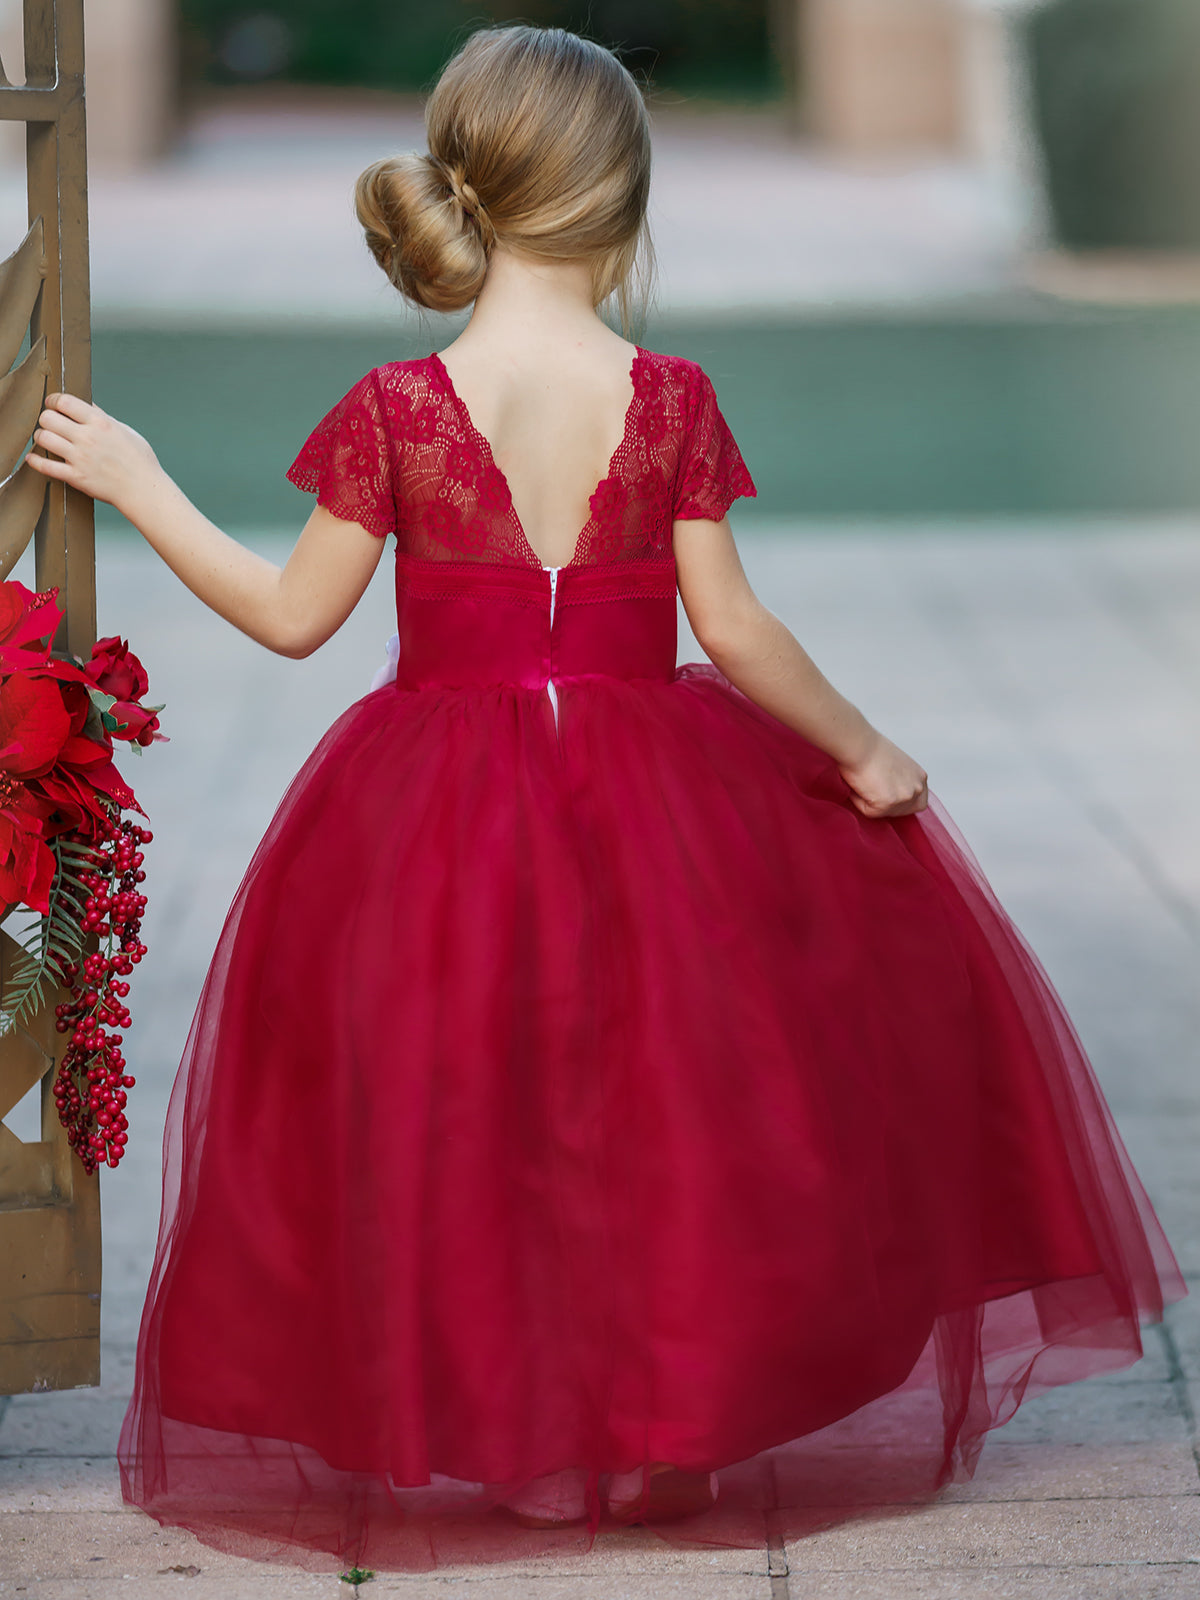 Girls Winter Formal Dress | Lace Sleeve Special Occasion Holiday Gown